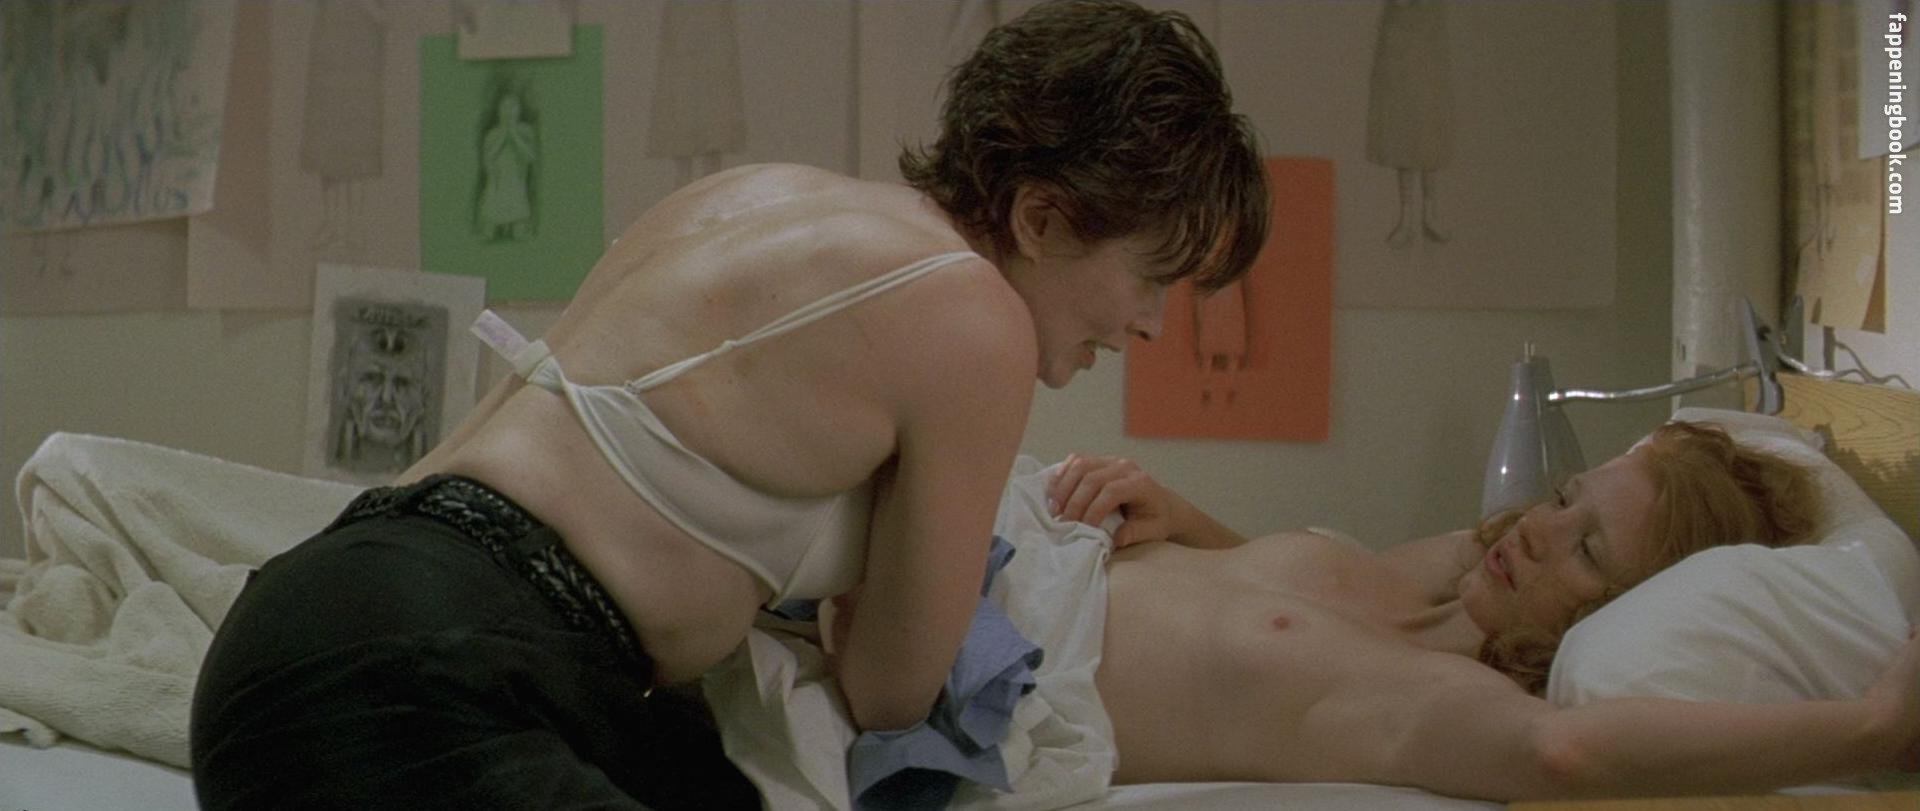 Frances Fisher Nude, The Fappening - Photo #191799 - FappeningBook.